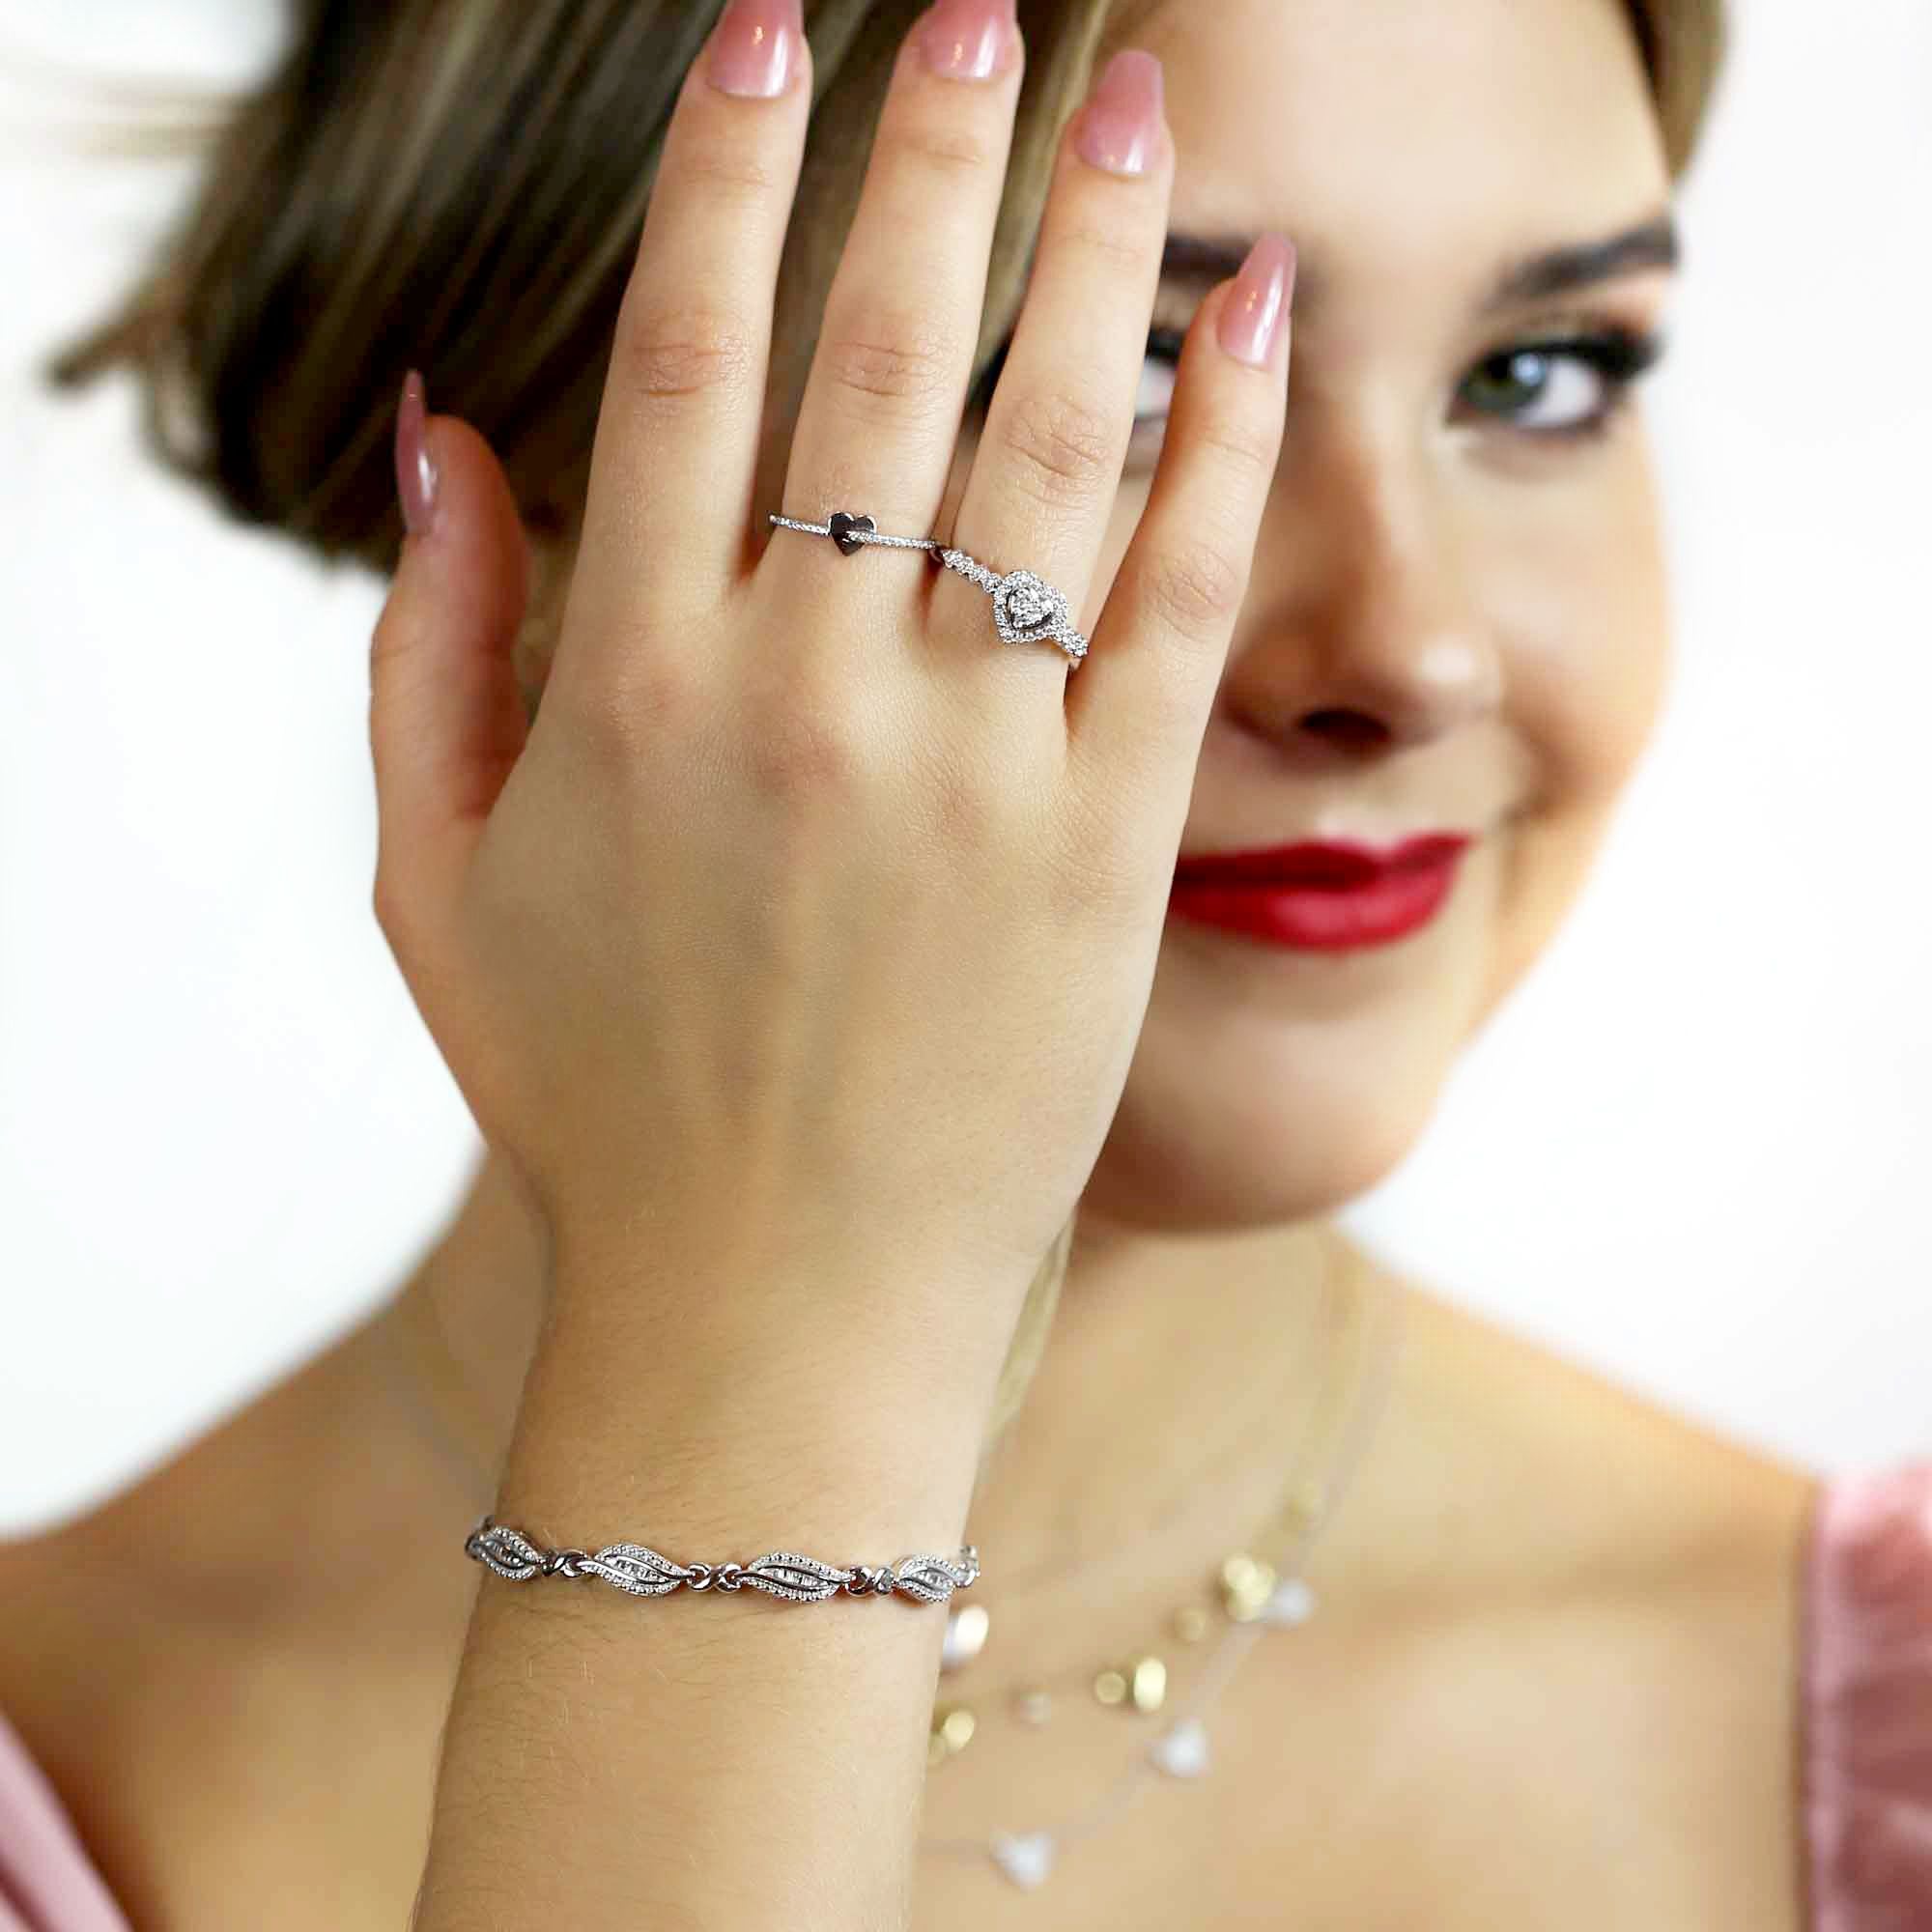 A woman with blonde hair wearing the At Last Diamond Bracelet from Steven Singer Jewelers